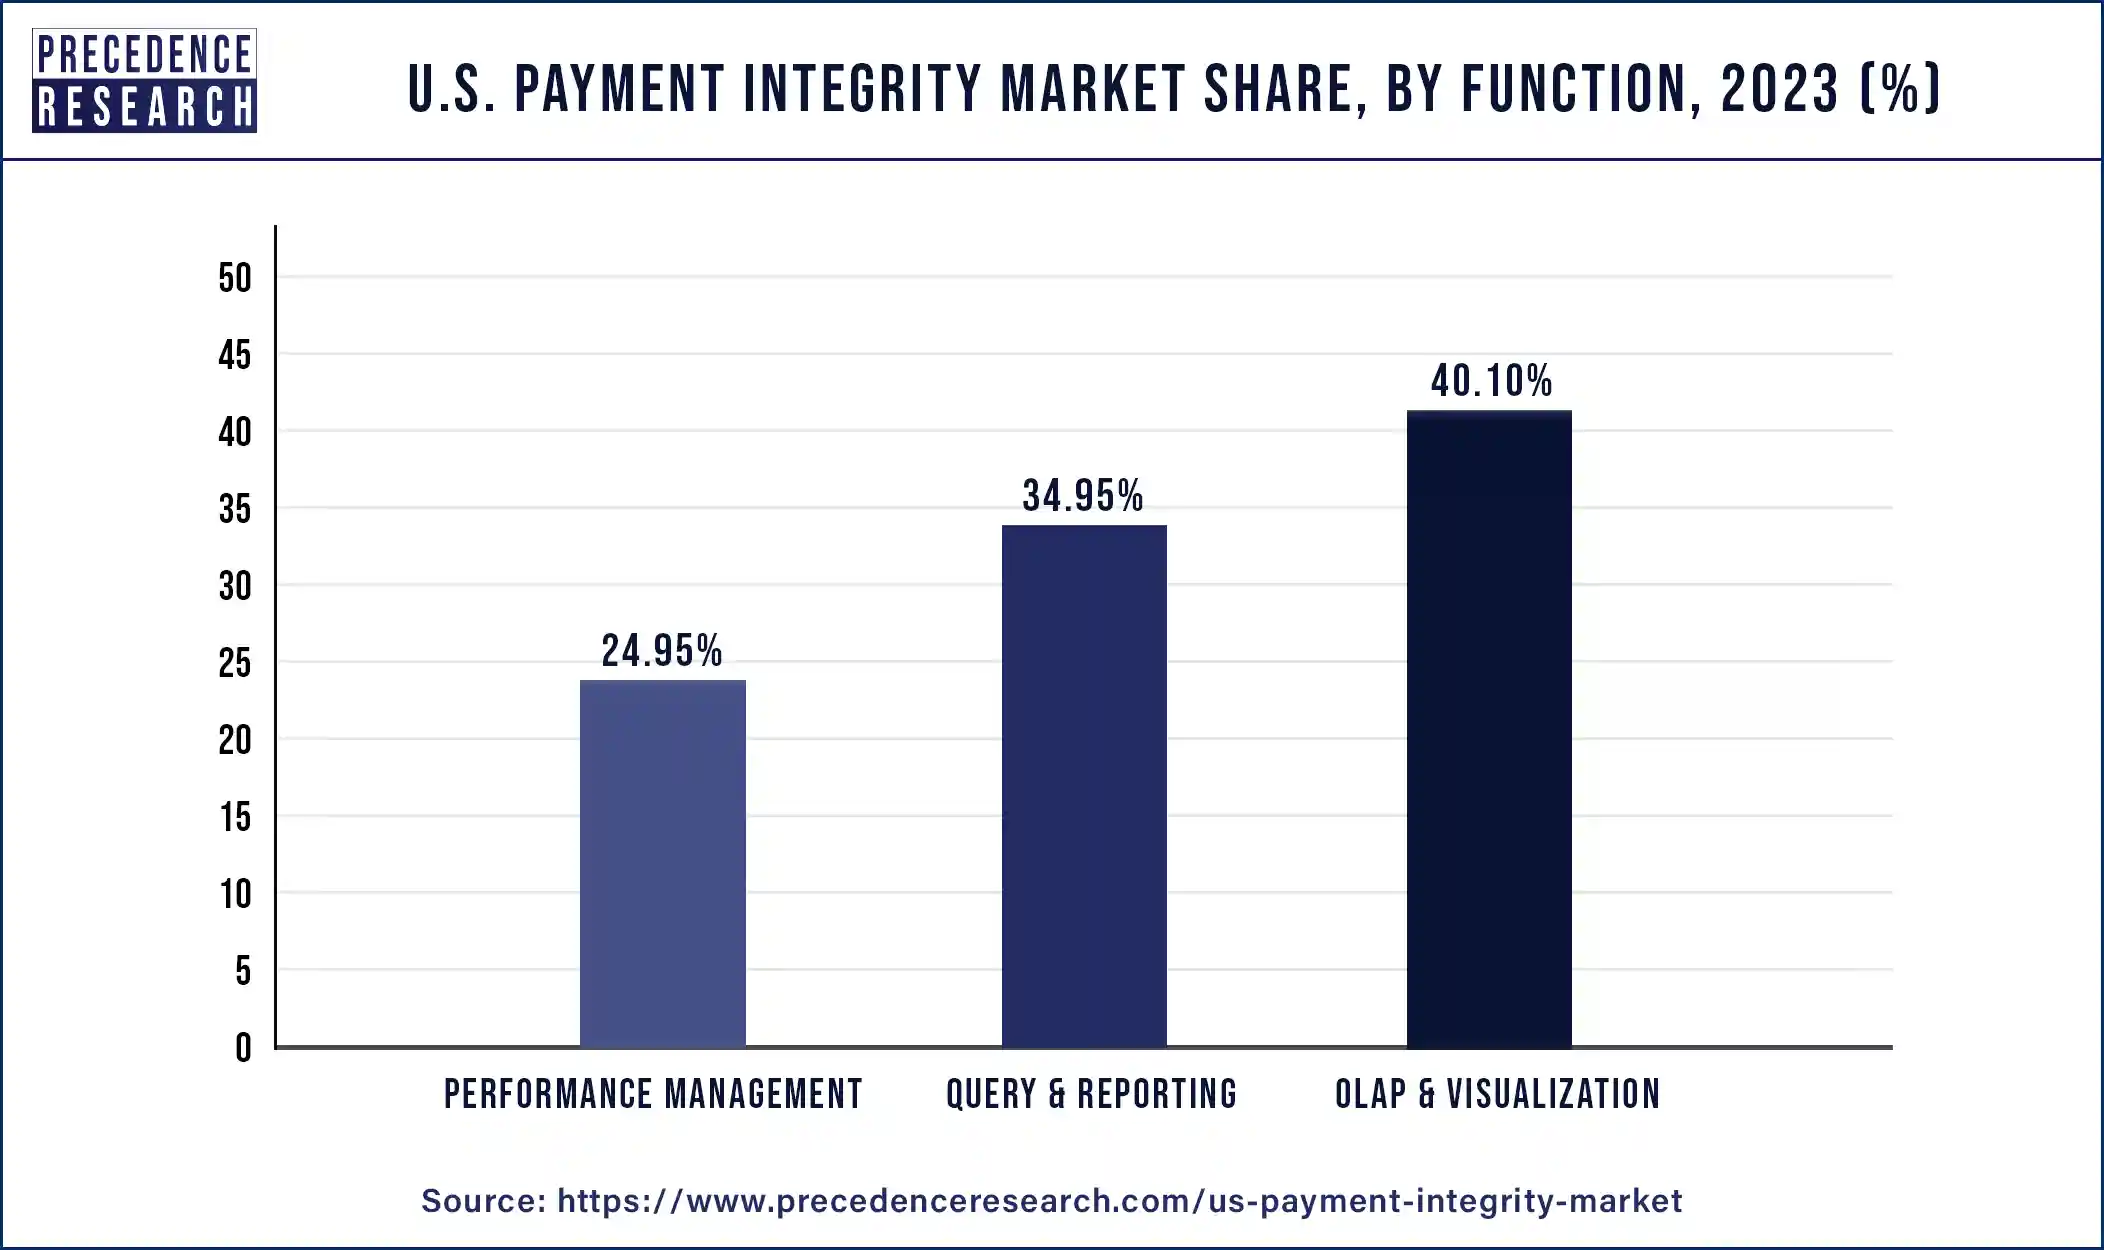 U.S. Payment Integrity Market Share, By Function, 2023 (%)